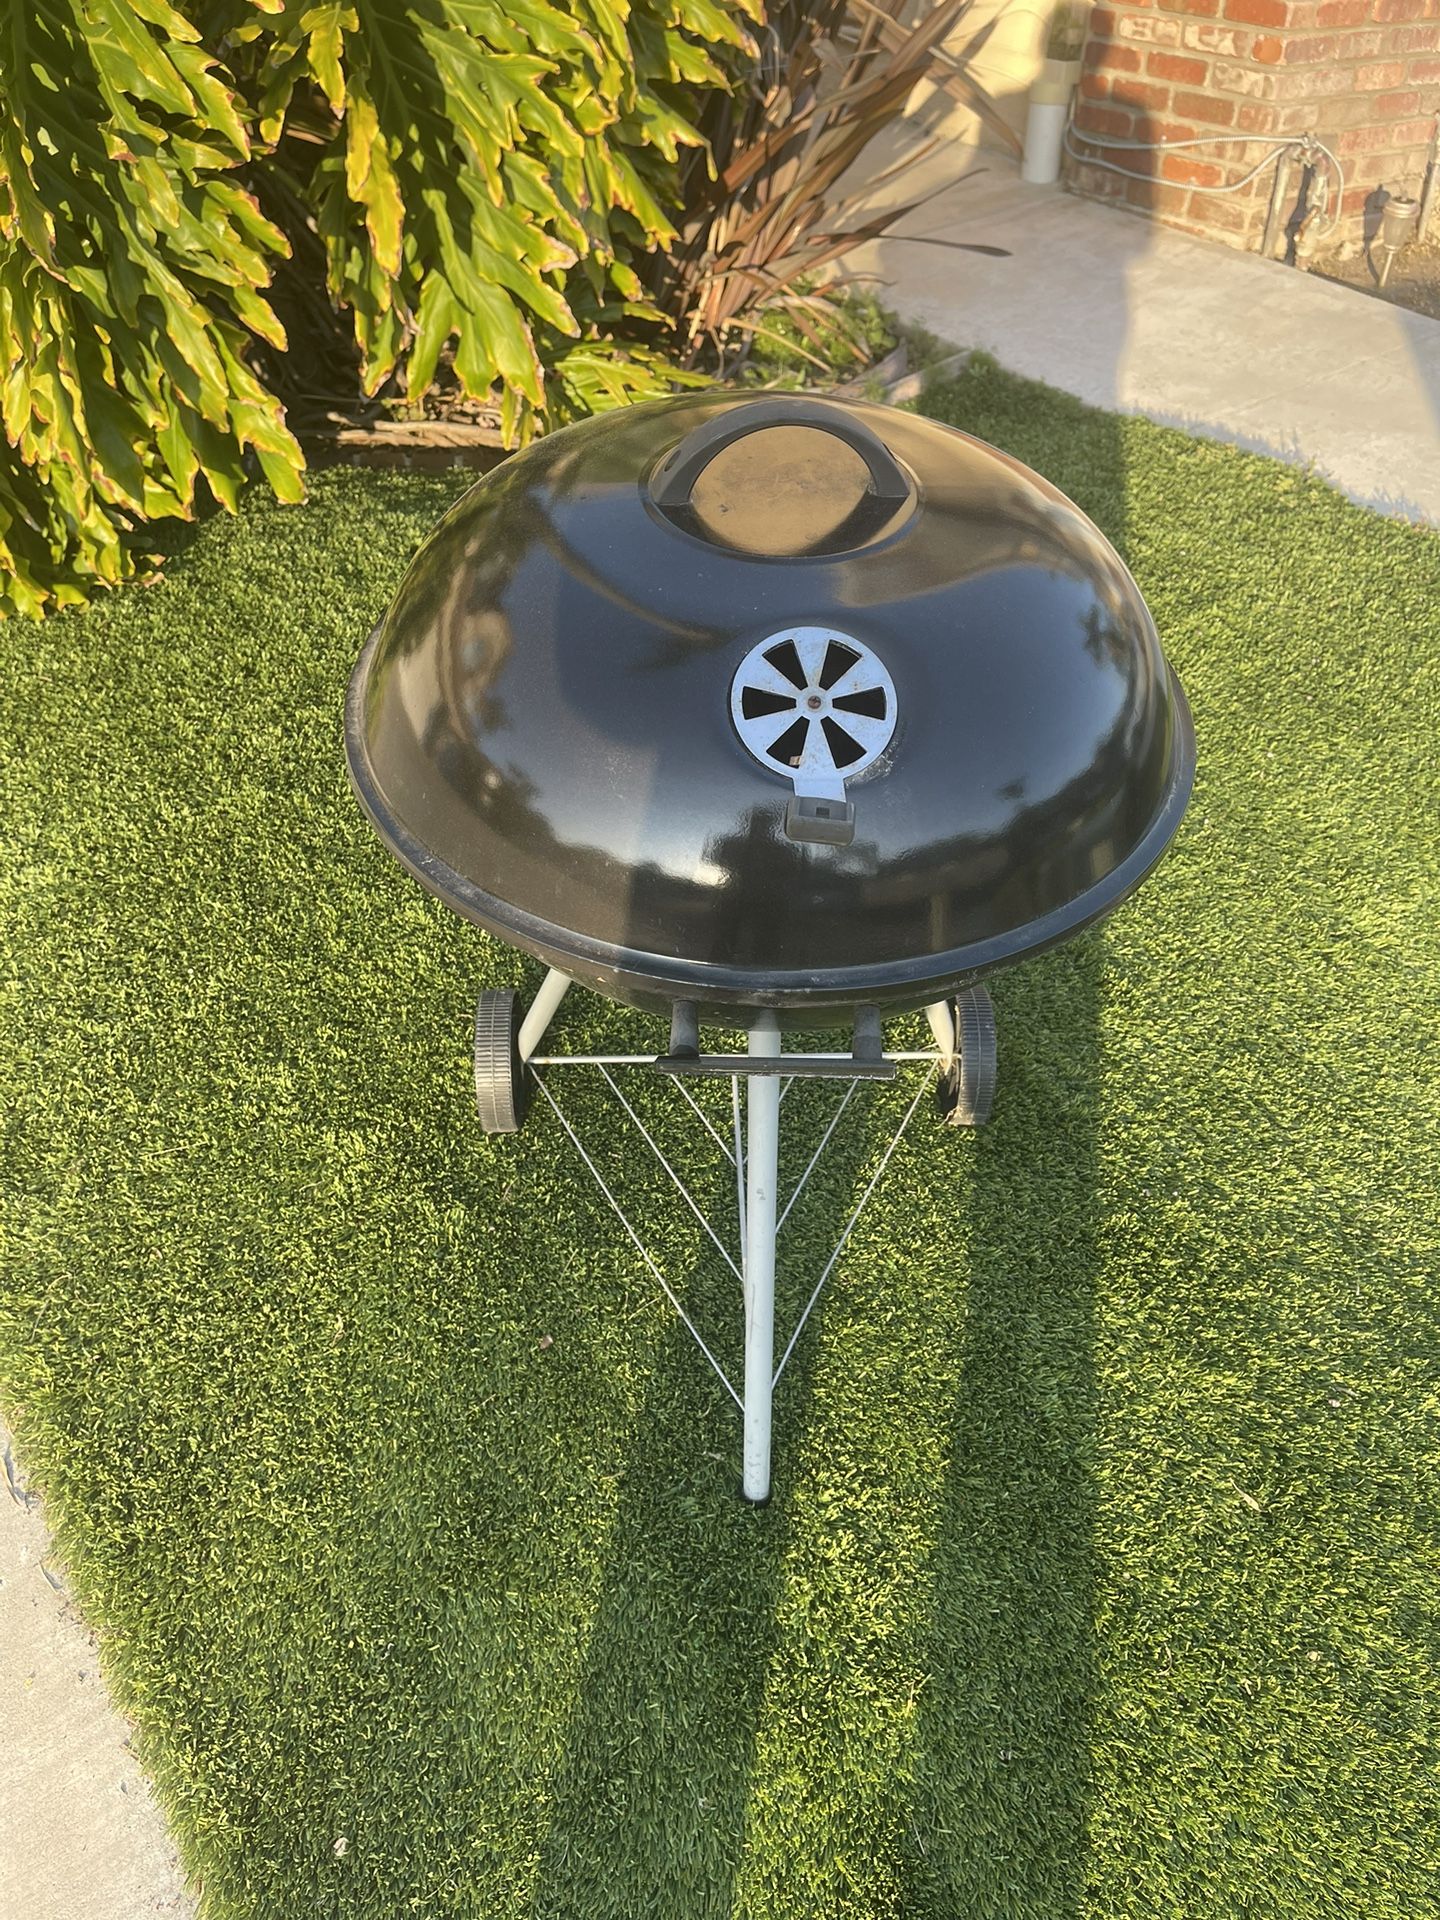 22 in. Kettle Charcoal BBQ Grill In Black